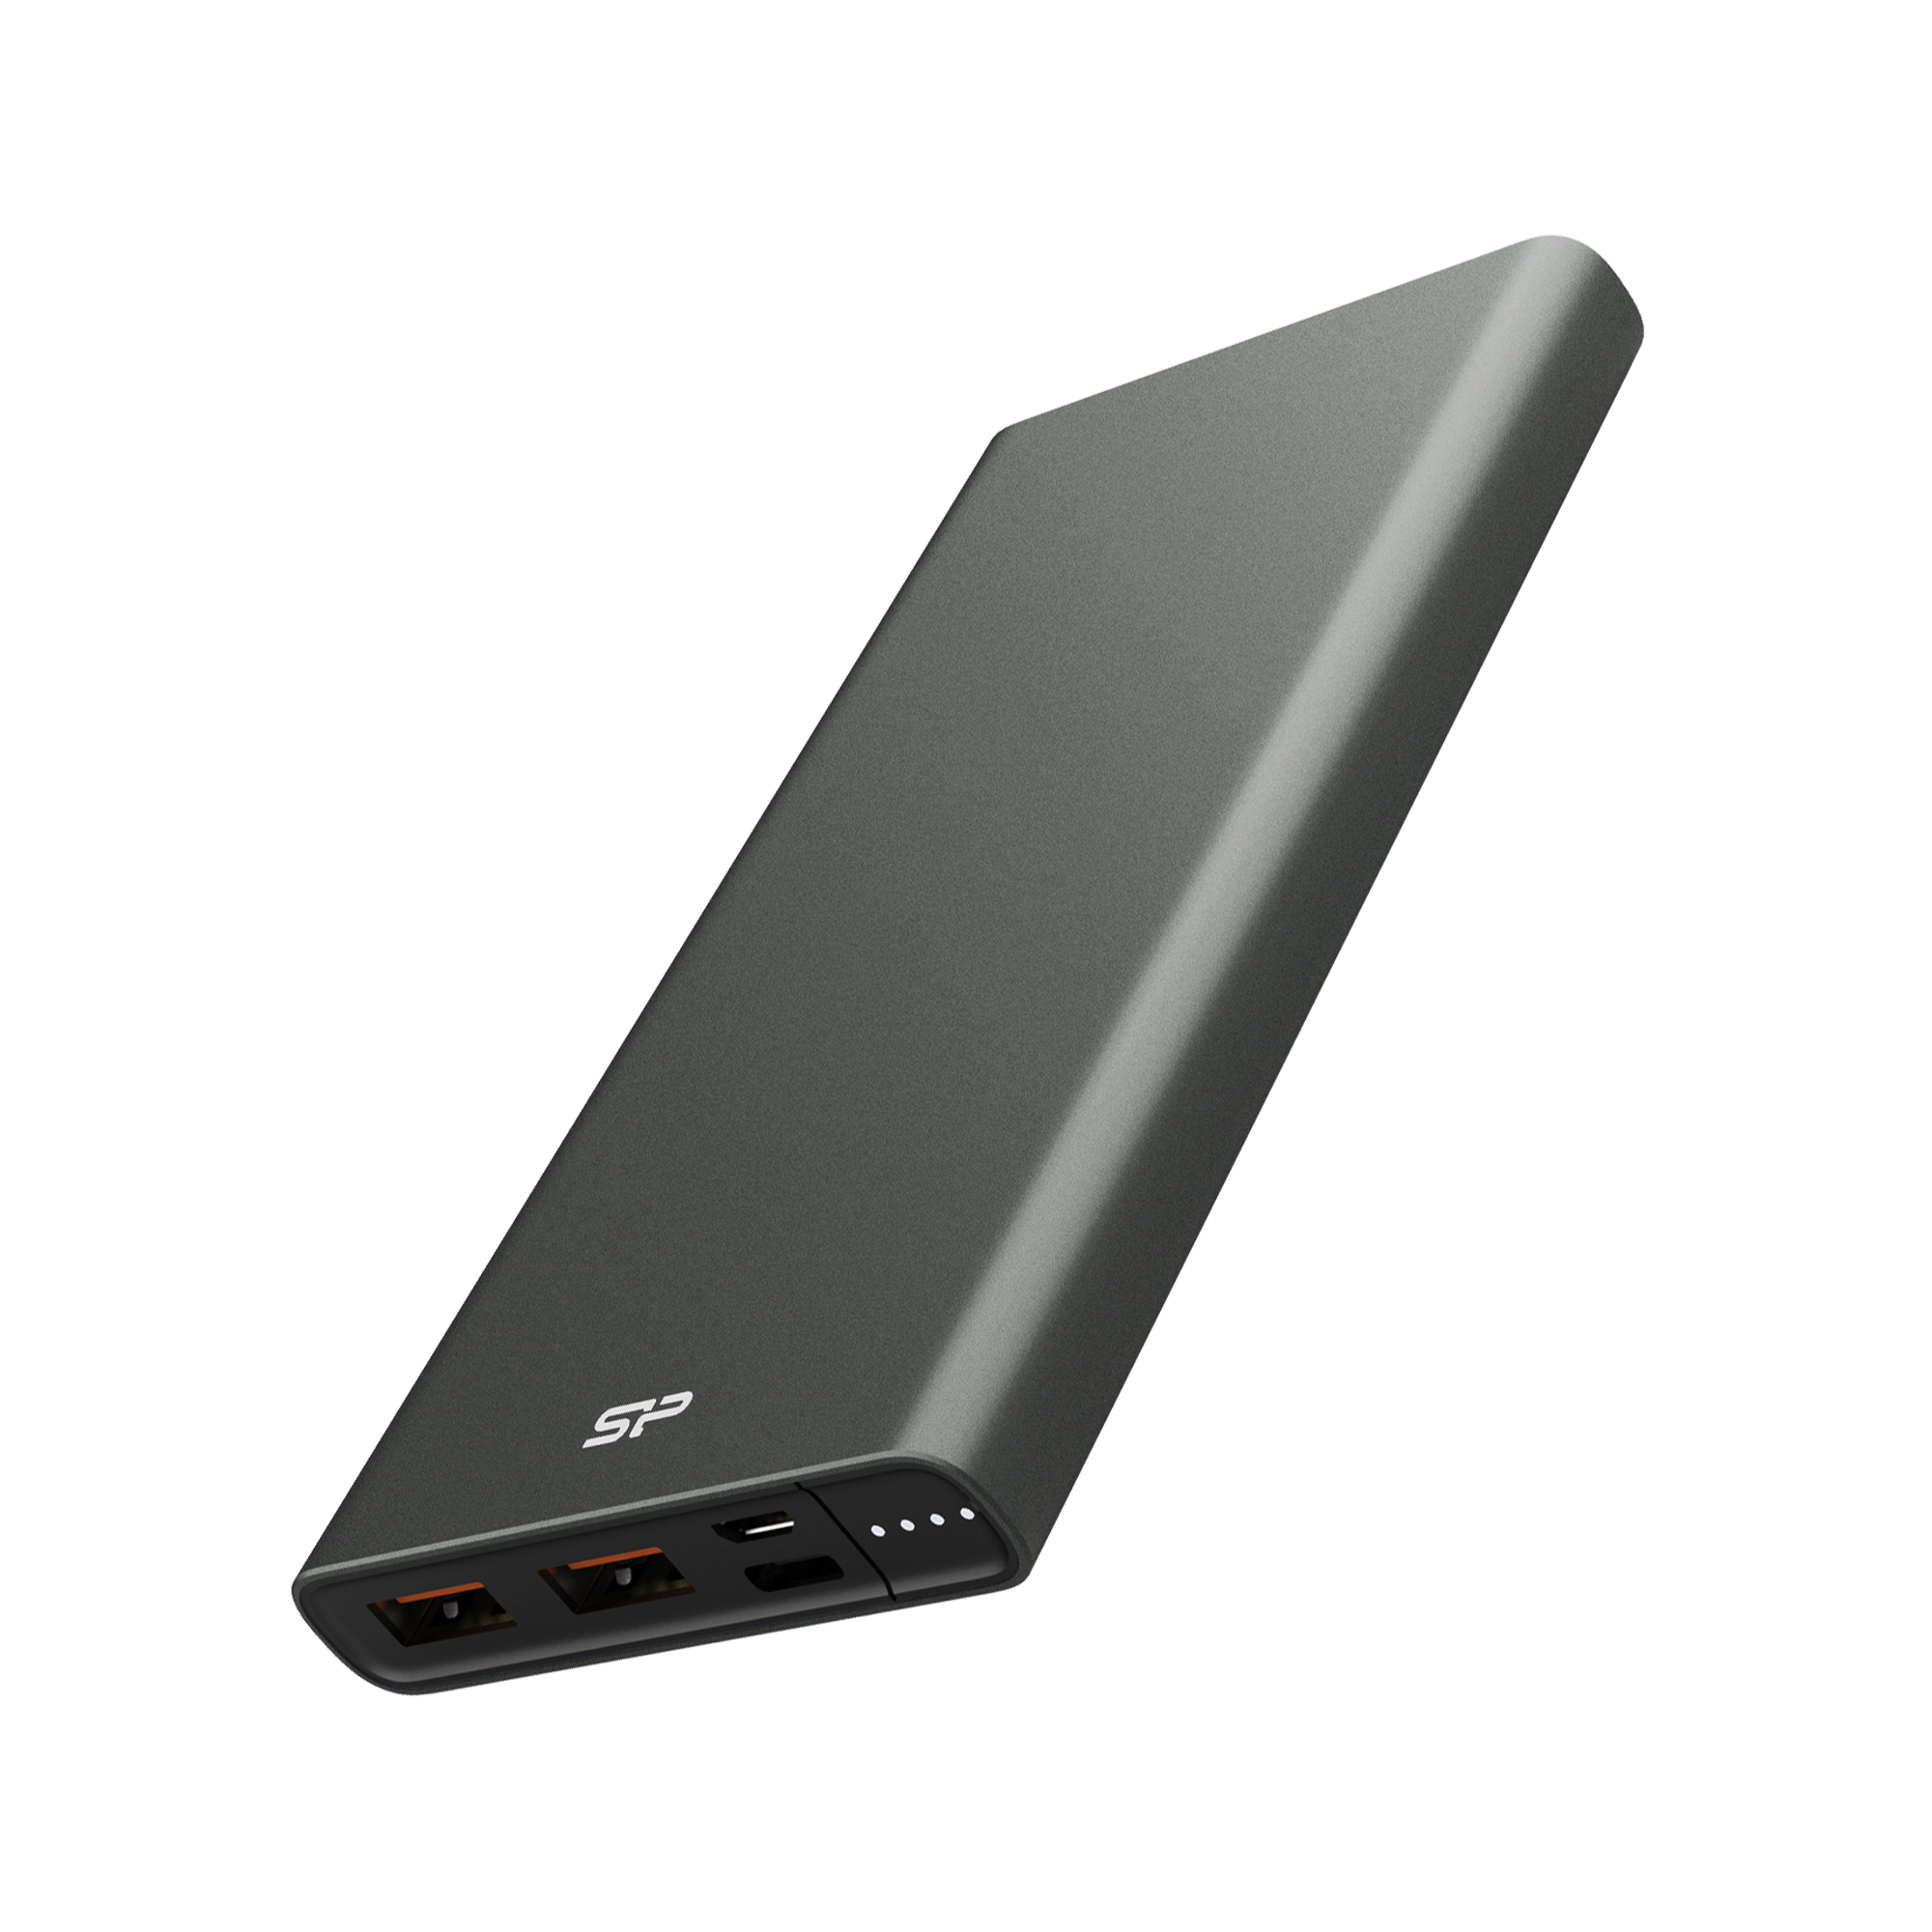 Silicon Power QP60 10000mAh 18W PD & Quick Charge 3.0 Power Bank Portable Charger - Titanium